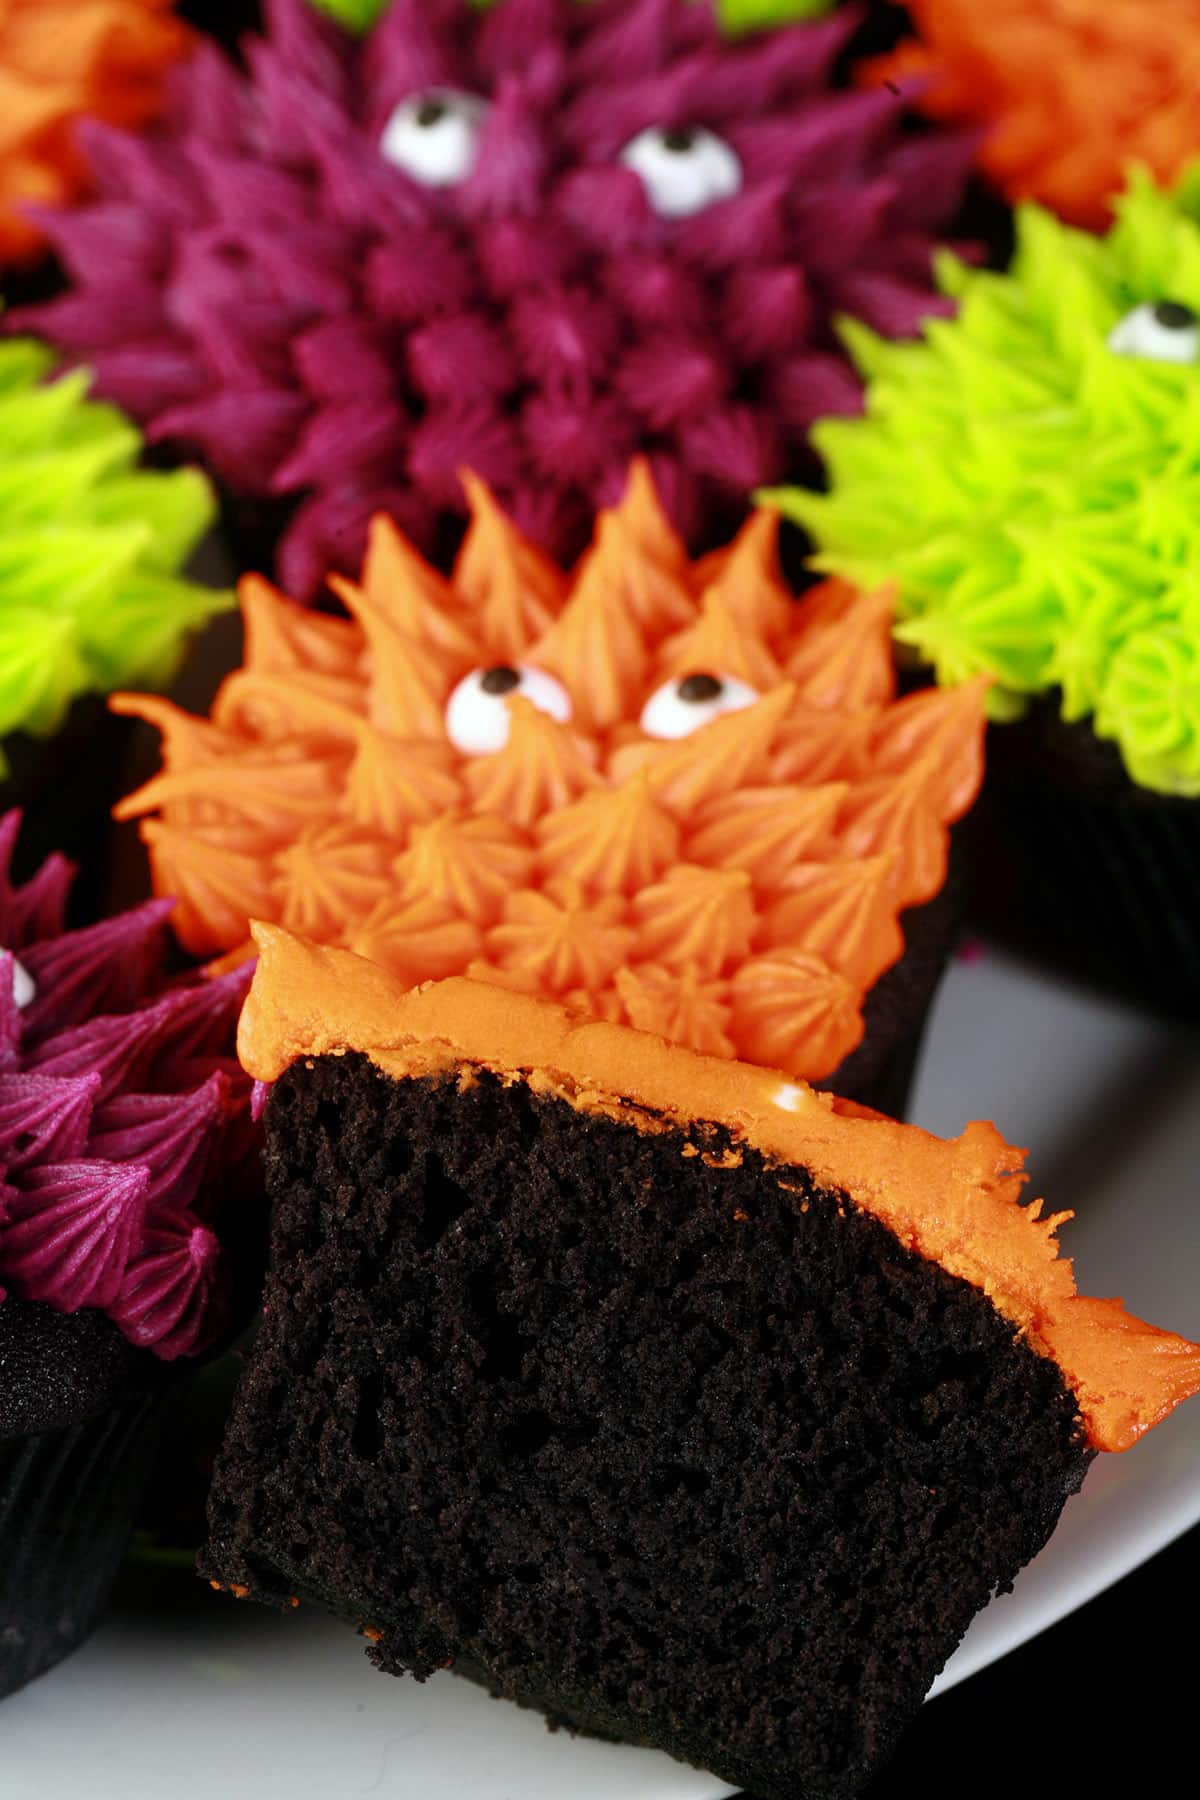 A plate fo gluten free halloween cupcakes, decorated to look like colourful monsters. A split gluten free black velvet cupcake is in the foreground.